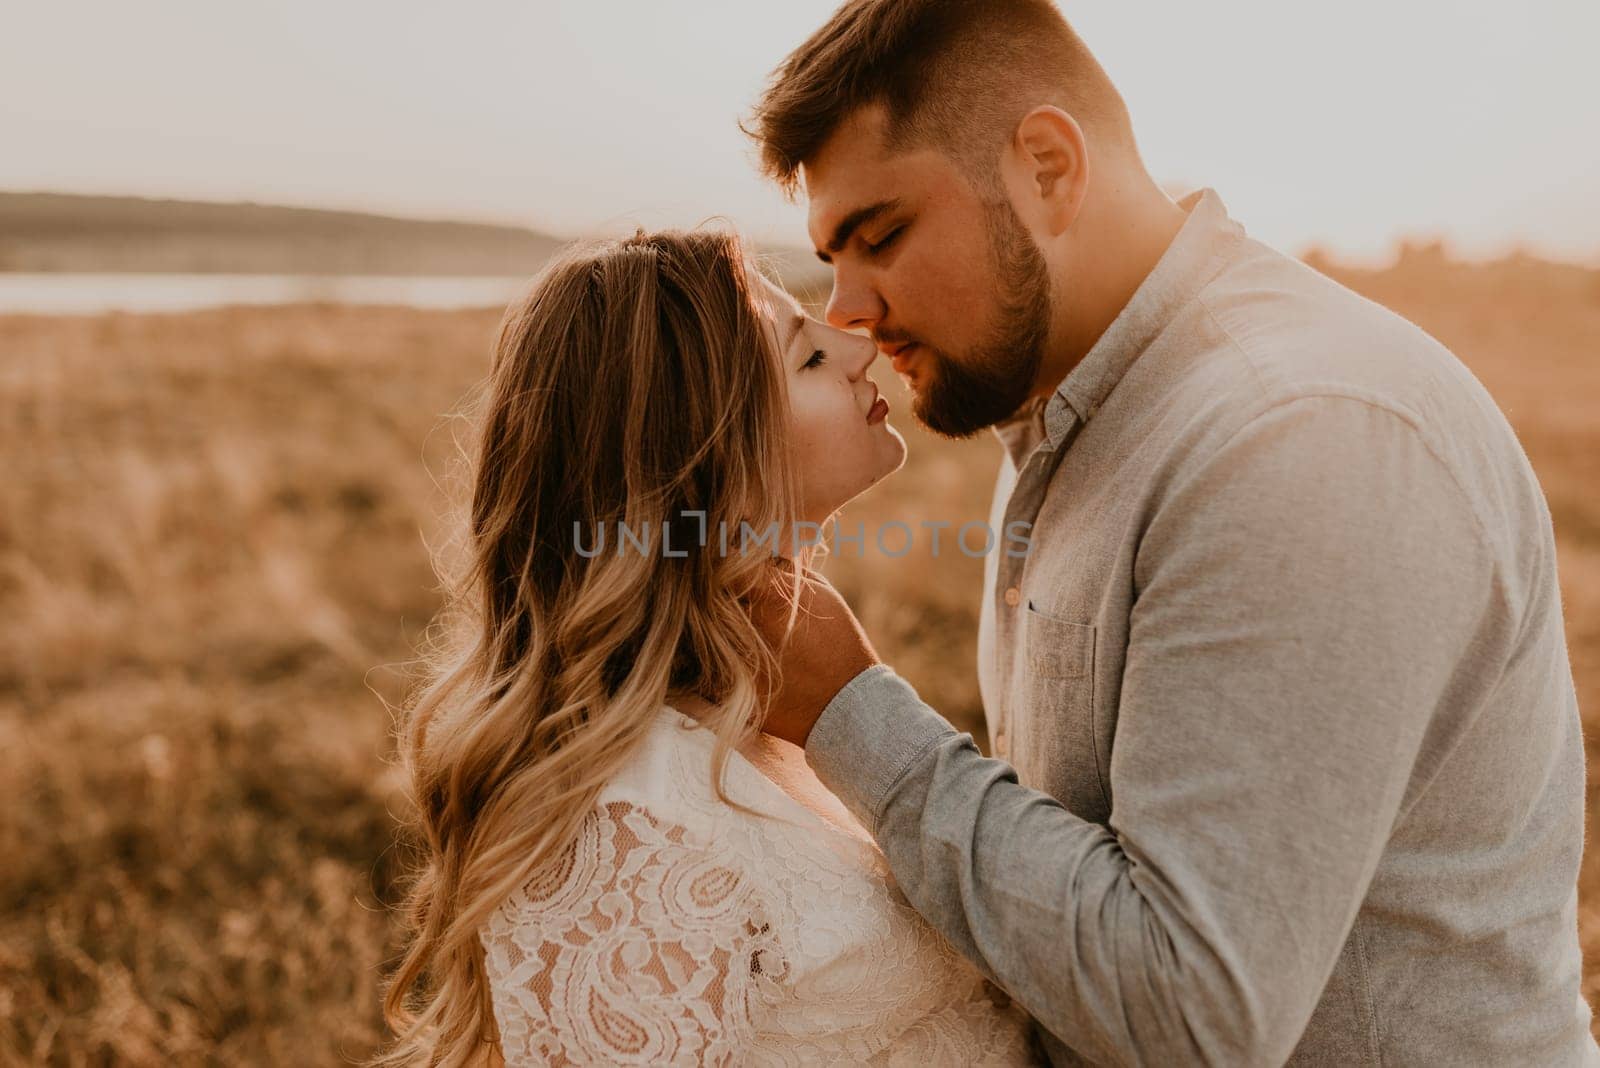 husband kisses his wife holding his hand on her cheek. Happy family resting in nature hugs kisses in summer at sunset. future mother Caucasian pregnant woman in white cotton dress. father